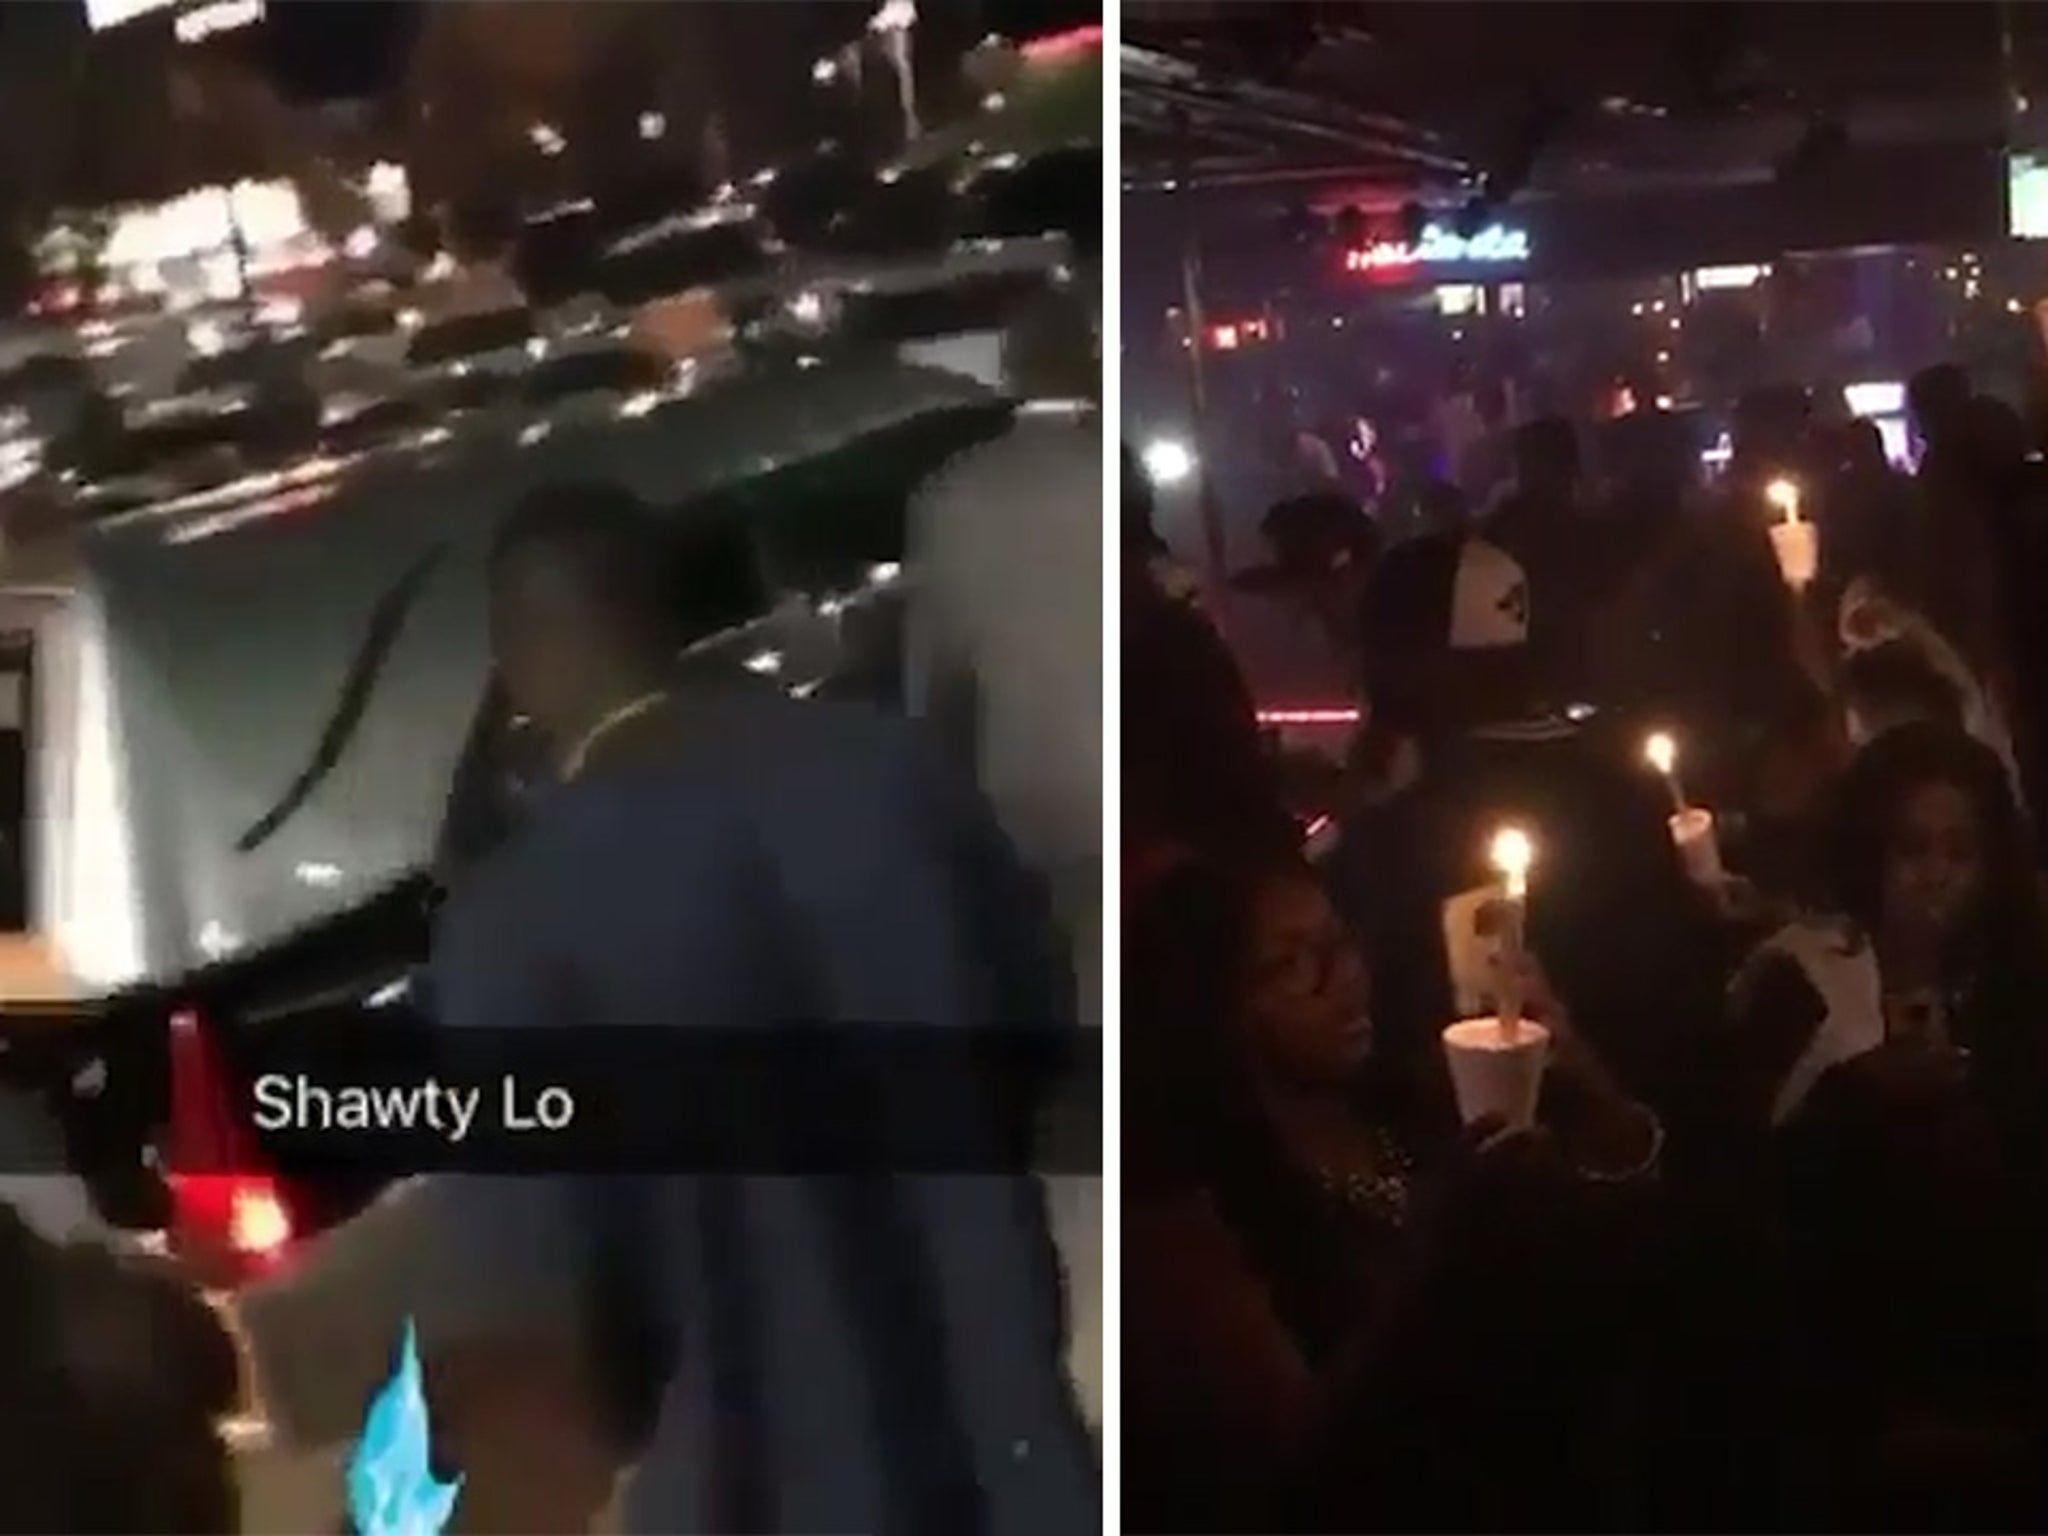 Swag Snap of the Week: Shawty Lo, Partyline